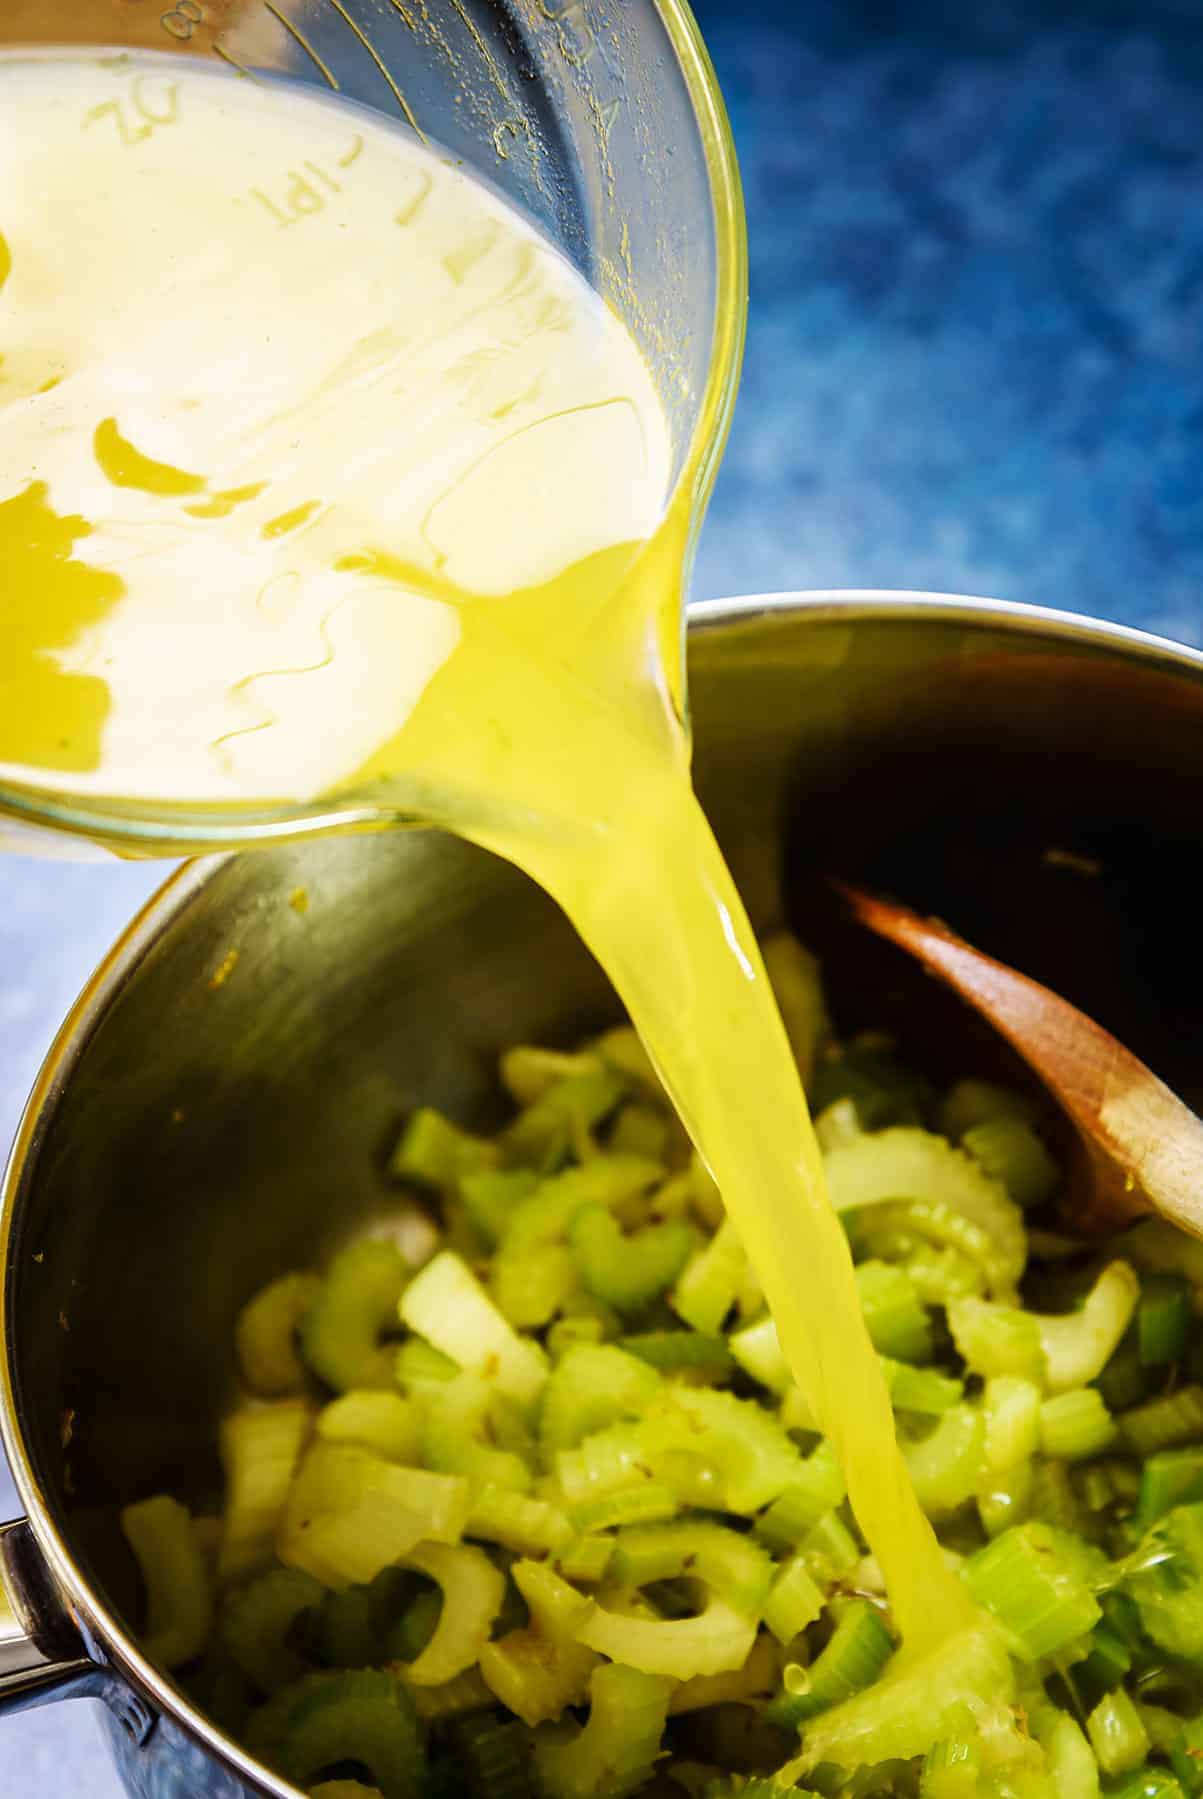 Pouring the stock into the pan of sliced celery